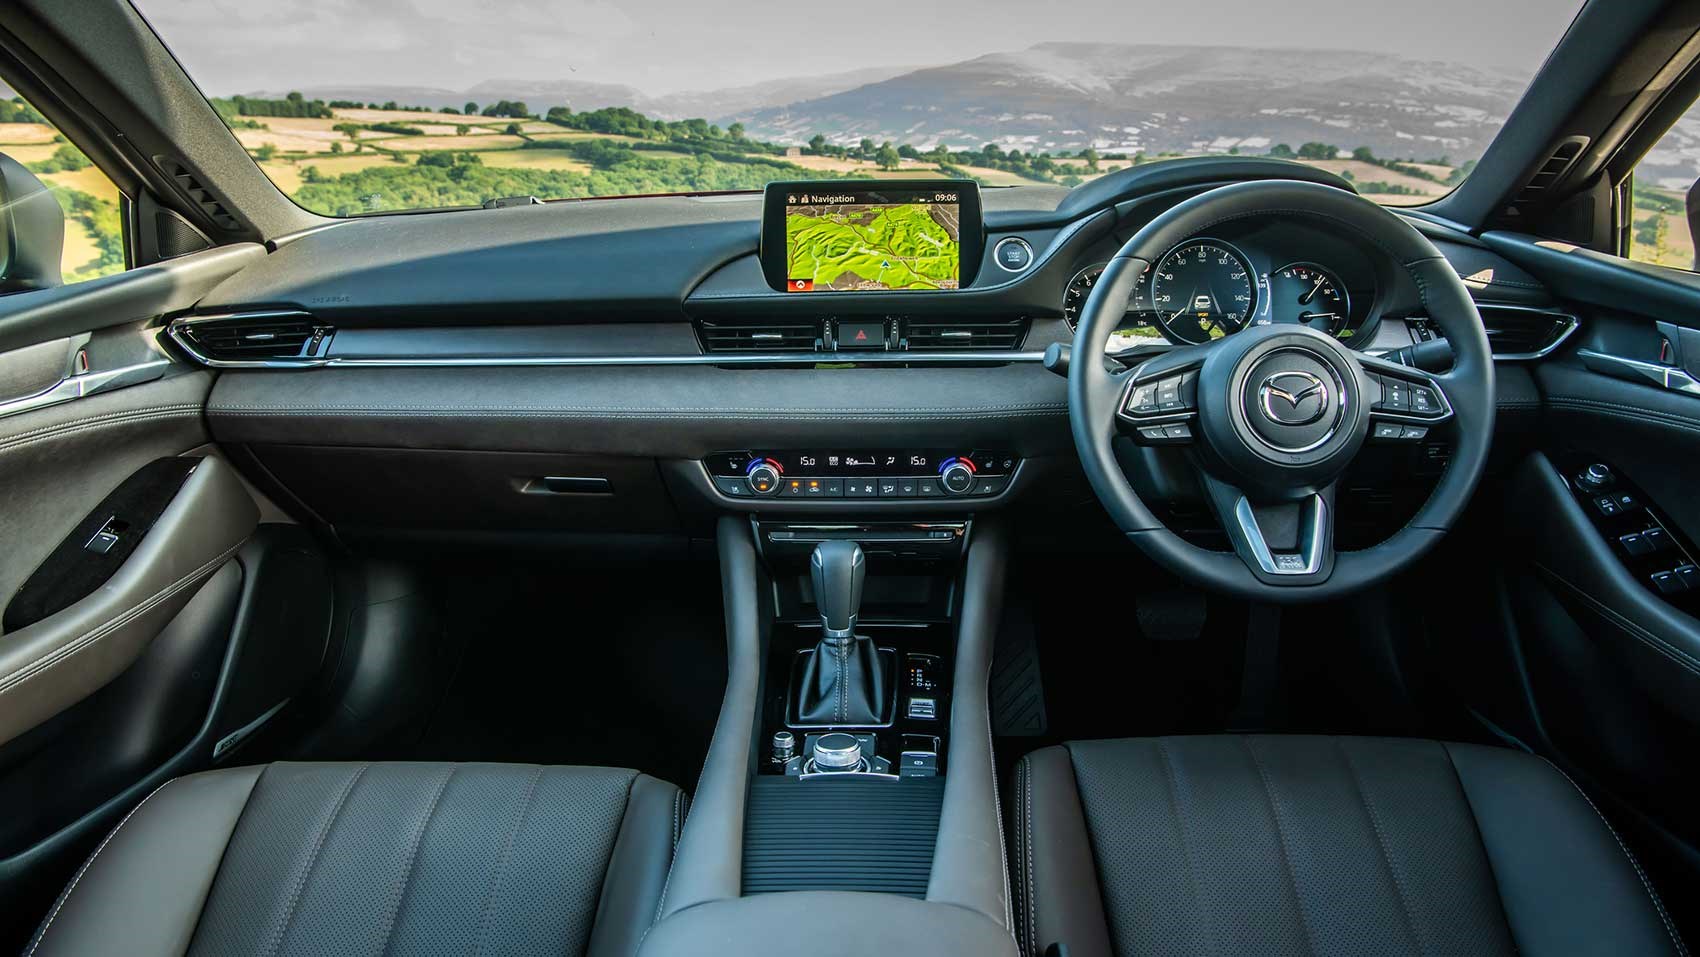 Mazda 6 2.2 Skyactiv-D 175 Sport Nav review: Yet another facelift for this  range-topper 6 saloon, The Independent